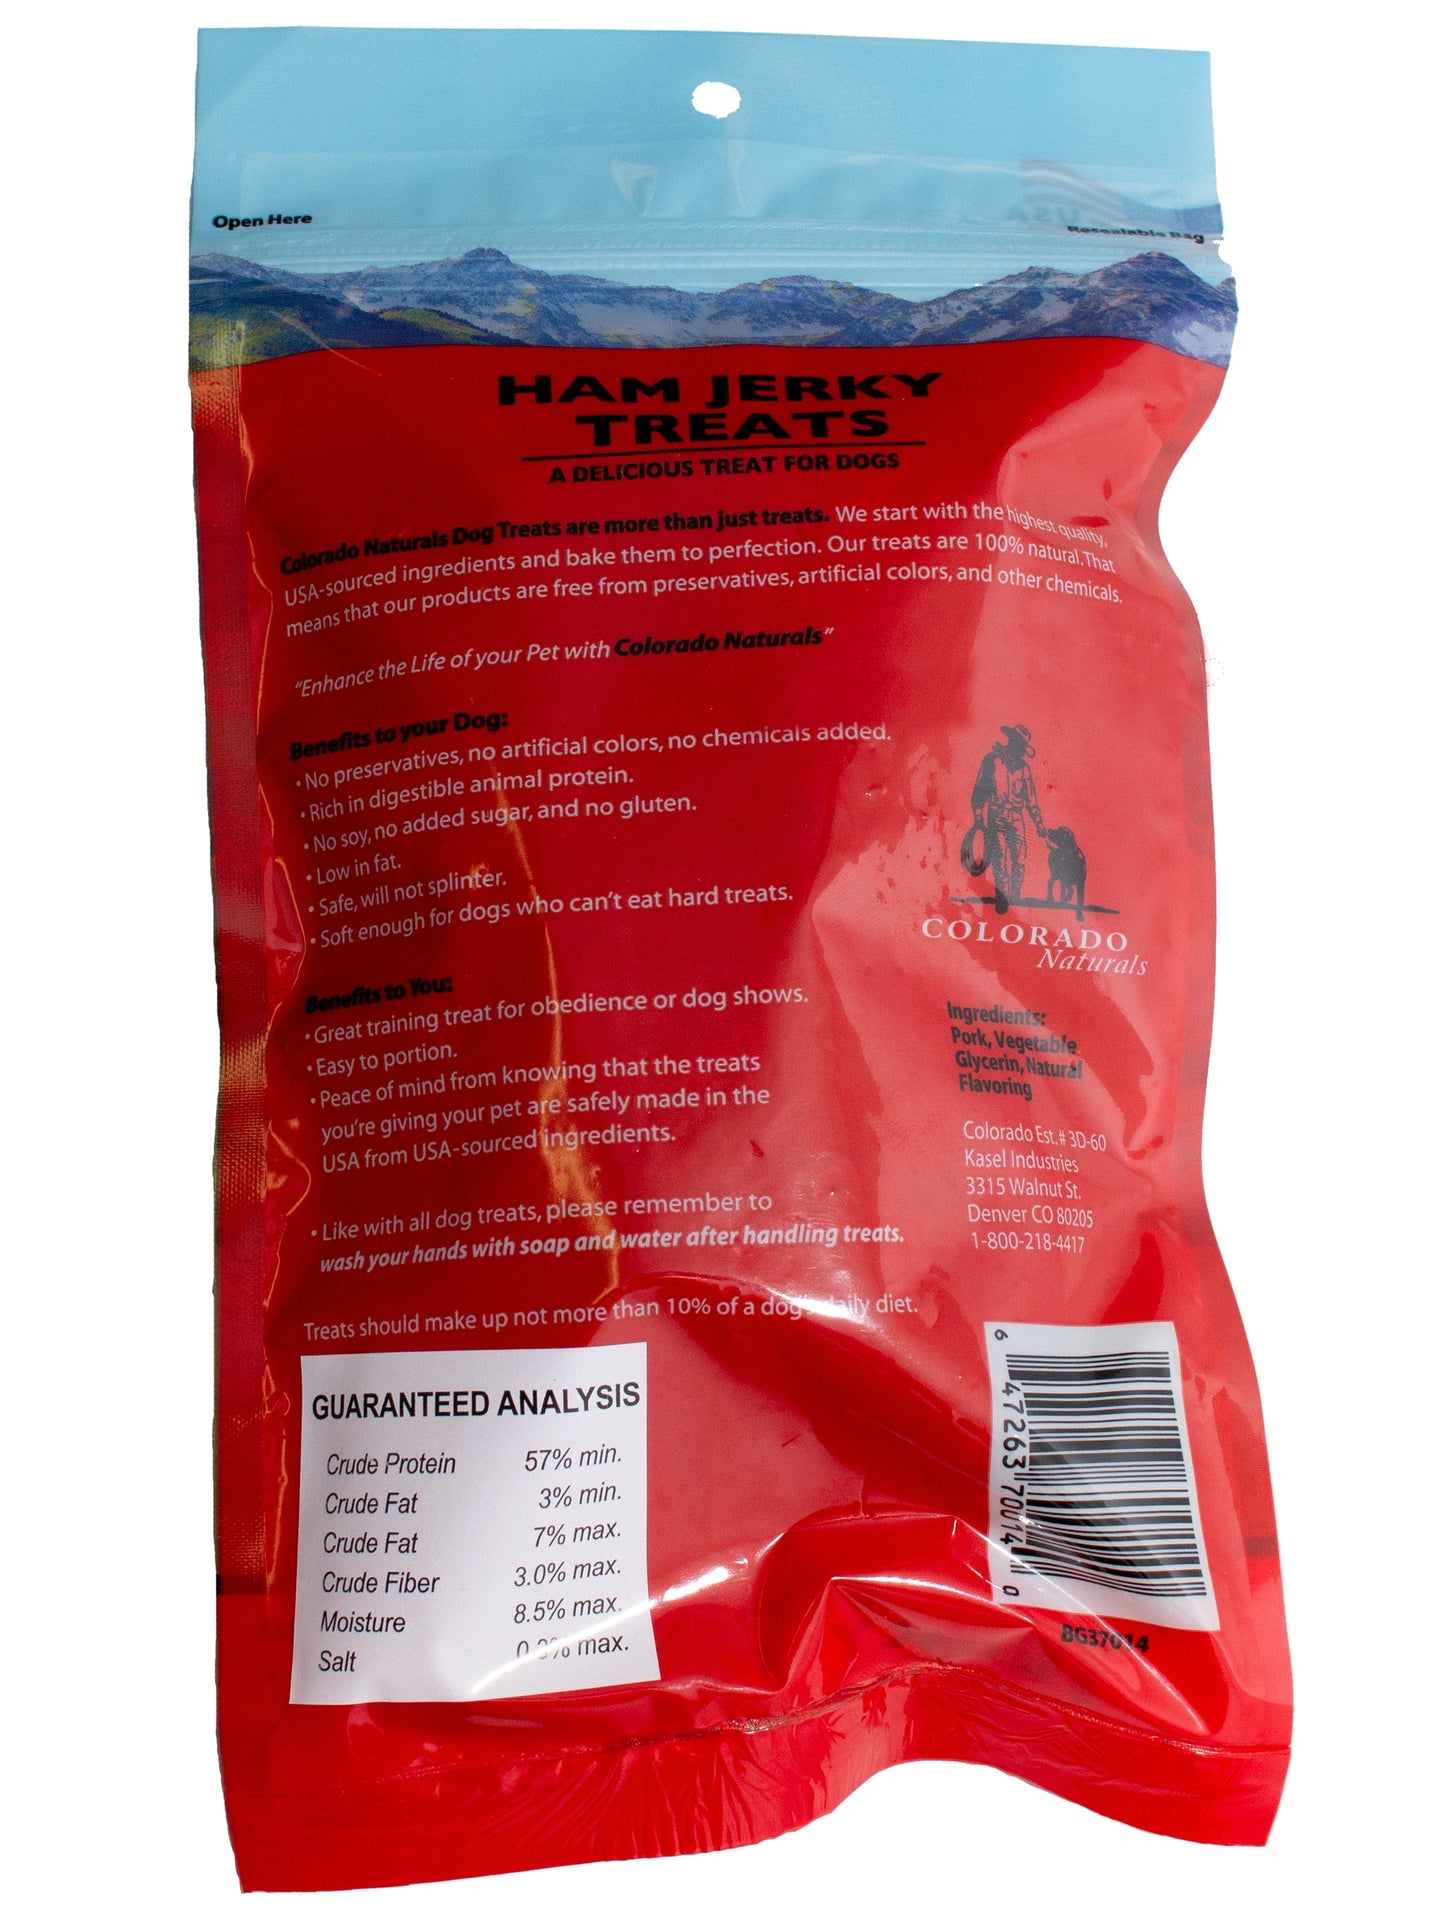 A photo of the back of the best 4 oz Ham Jerky Dog Treats from Colorado Pet Treats by Colorado Naturals. Colorado Pet Treats - All-Natural, All-American Dog Jerky, Jerky Chips, and Bones - Treat your furry friend to our delicious and healthy pet treats made with only the finest ingredients sourced in the USA. Delicious and chewy all-American dog jerky made with natural ingredients sourced in Colorado.